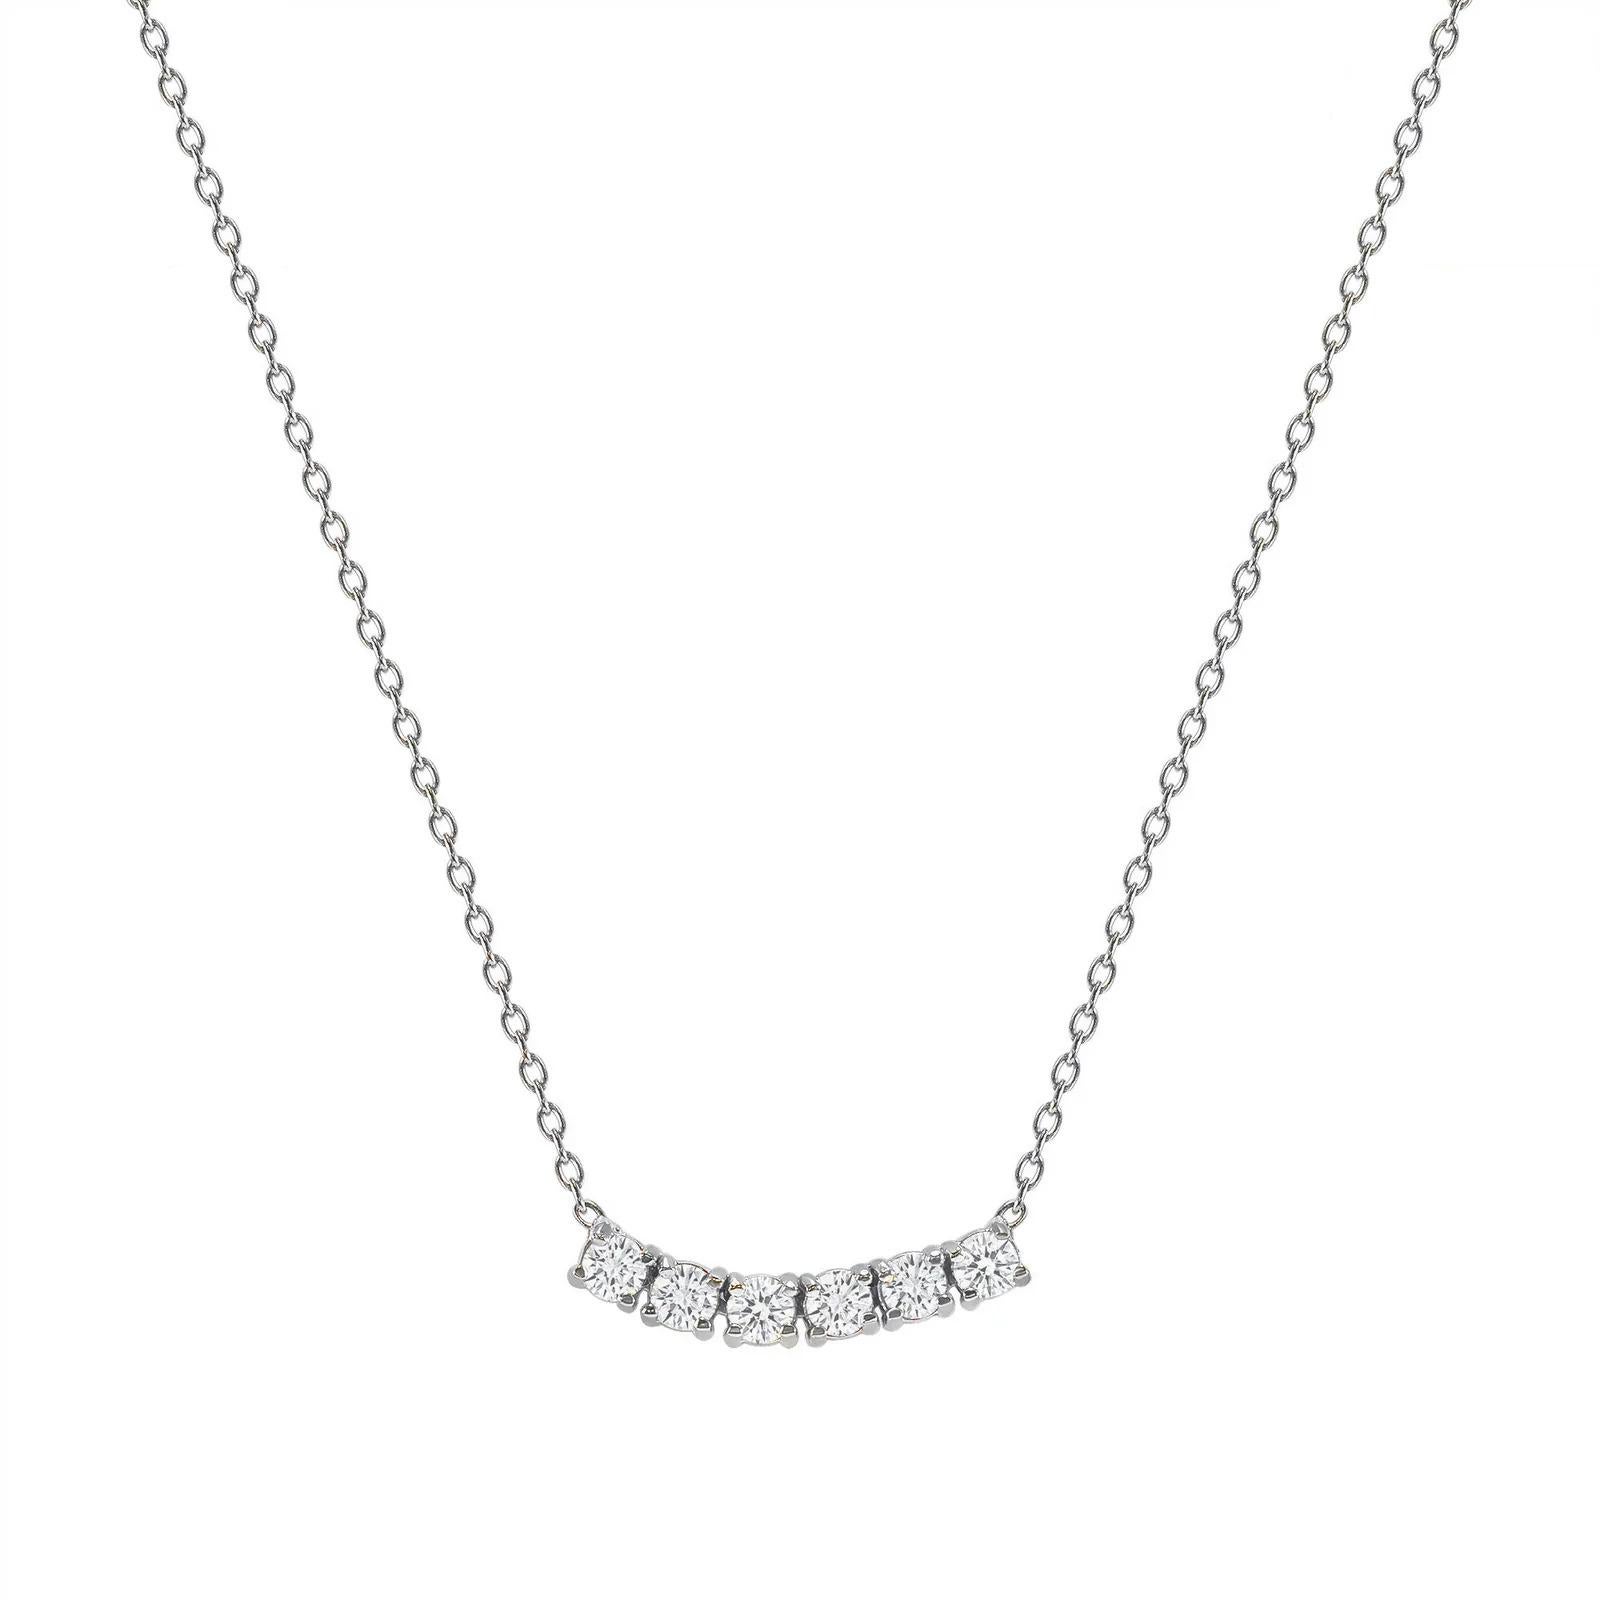 This petite, curved diamond necklace is crafted with gorgeous 14k gold set with six round diamonds.  

Gold: 14k 
Diamond Total Carats: 2 ct
Diamond Cut: Round (6 diamonds)
Diamond Clarity: VS
Diamond Color: F
Color: White Gold
Necklace Length: 18